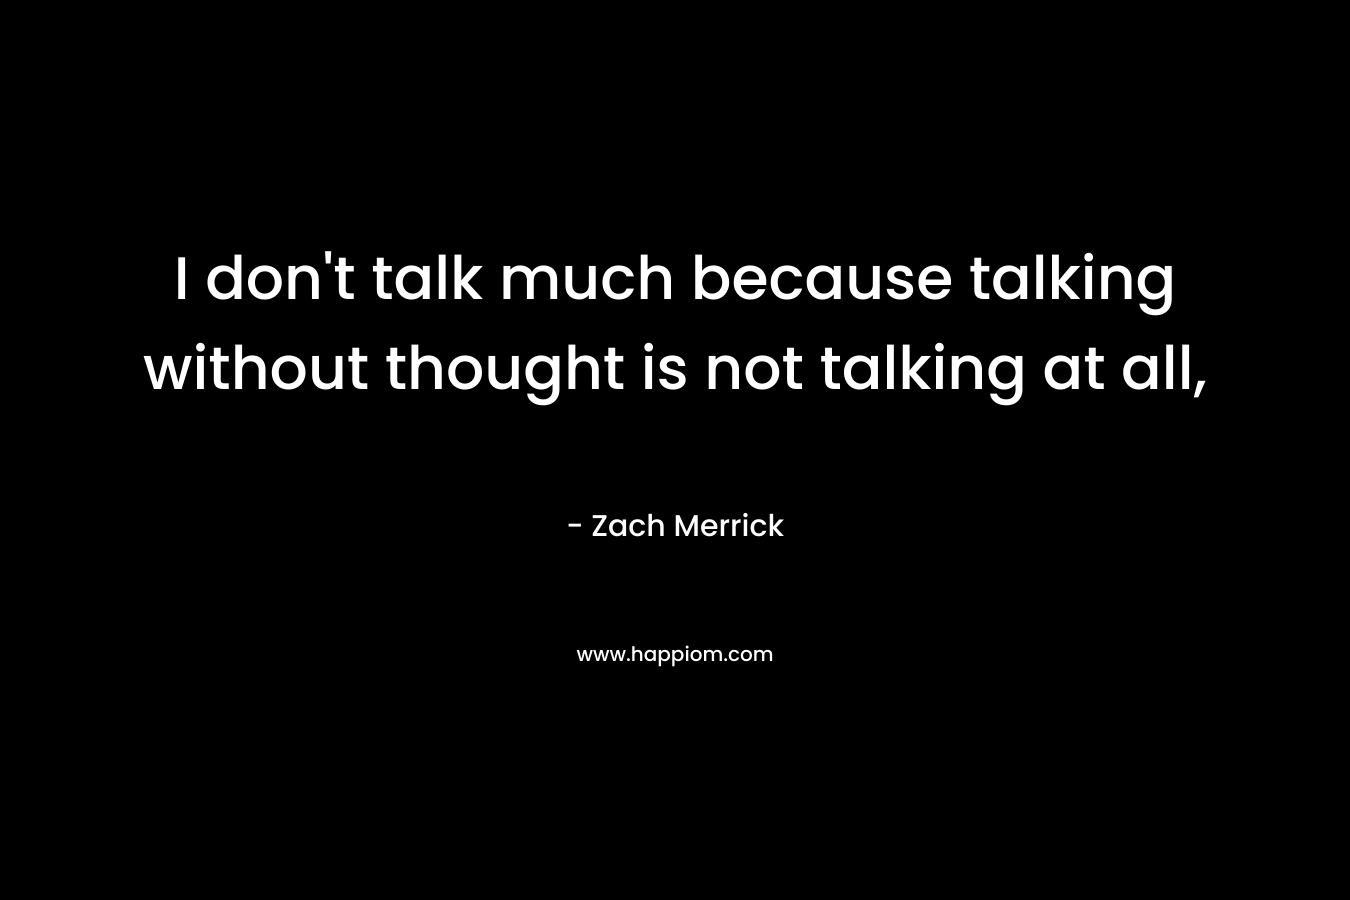 I don’t talk much because talking without thought is not talking at all, – Zach Merrick